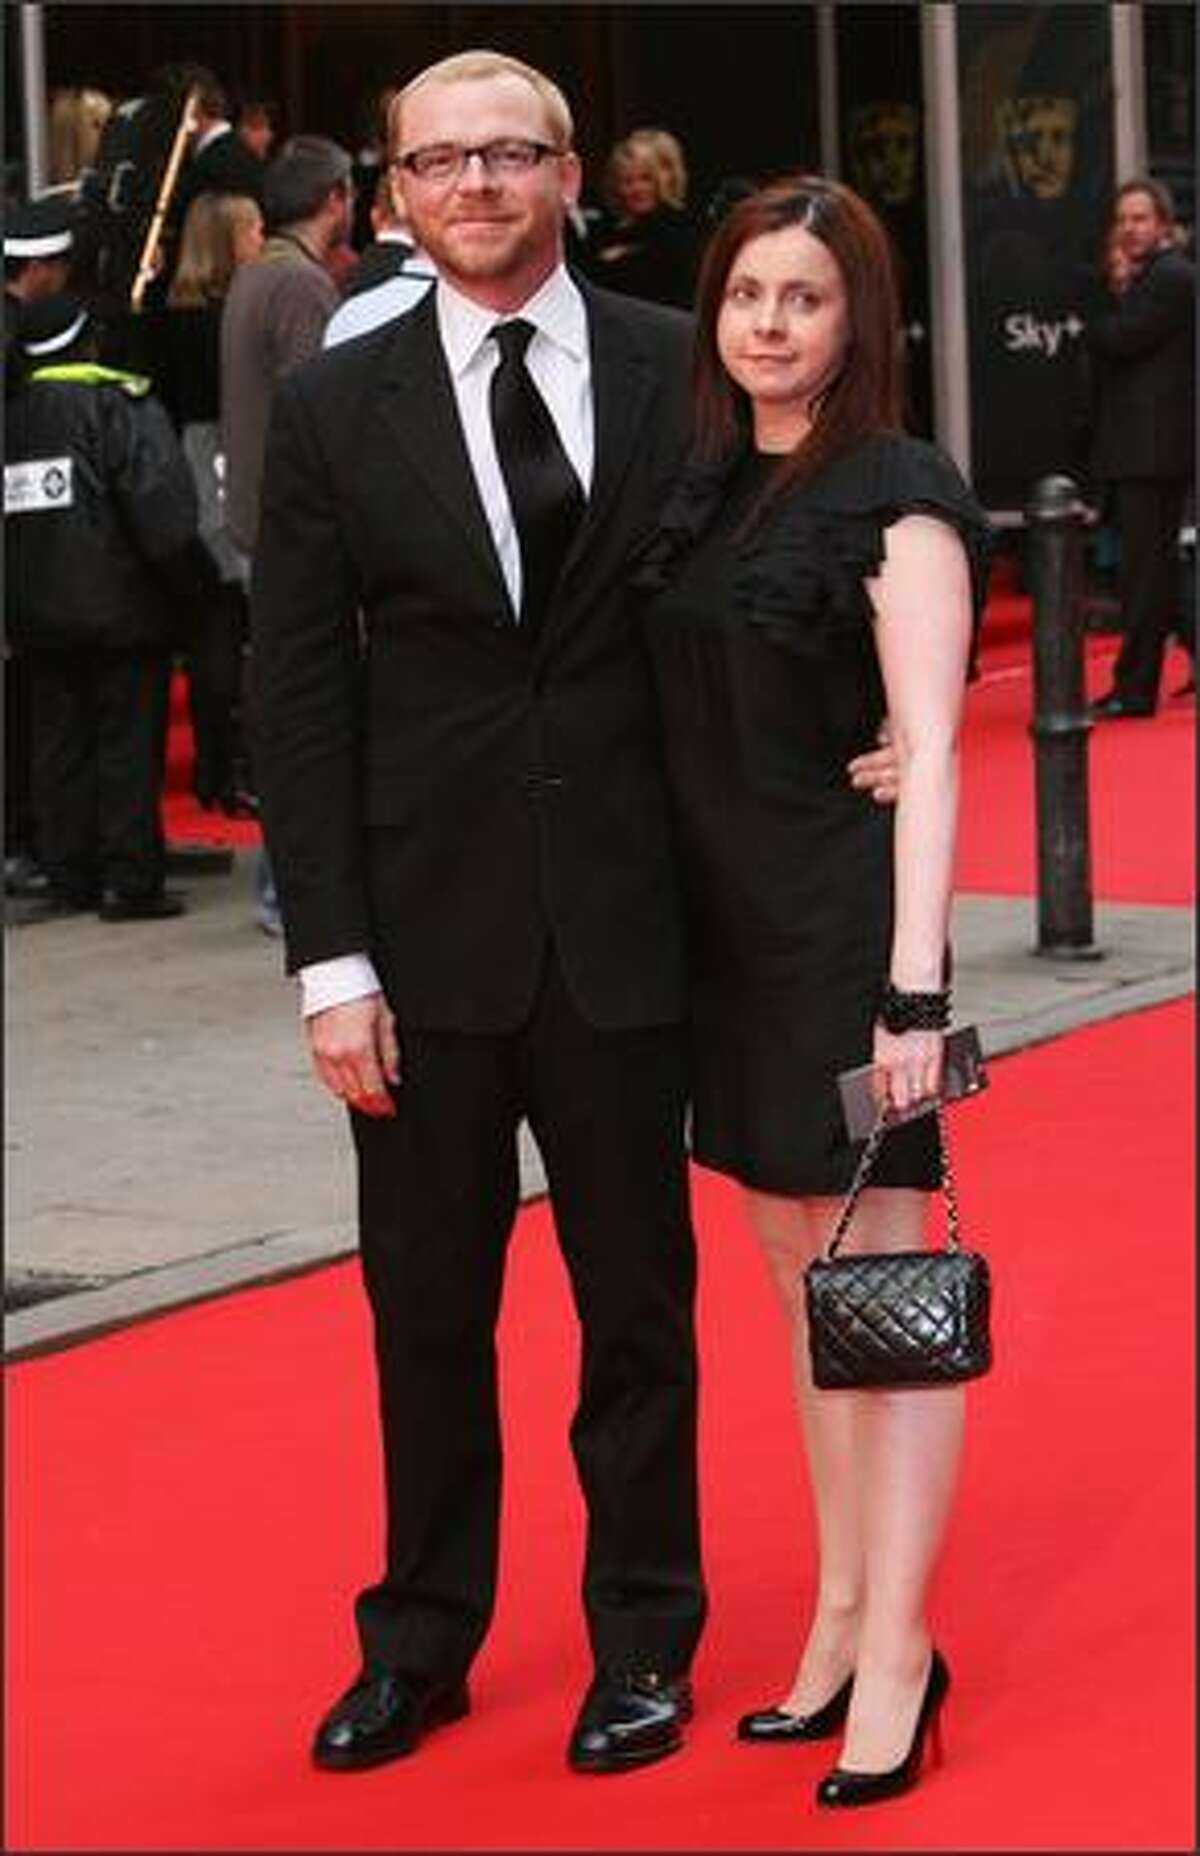 Simon Pegg and his wife Maureen McCann arrive for the British Academy Television Awards 2008 at The Palladium on April 20, 2008 in London, England.